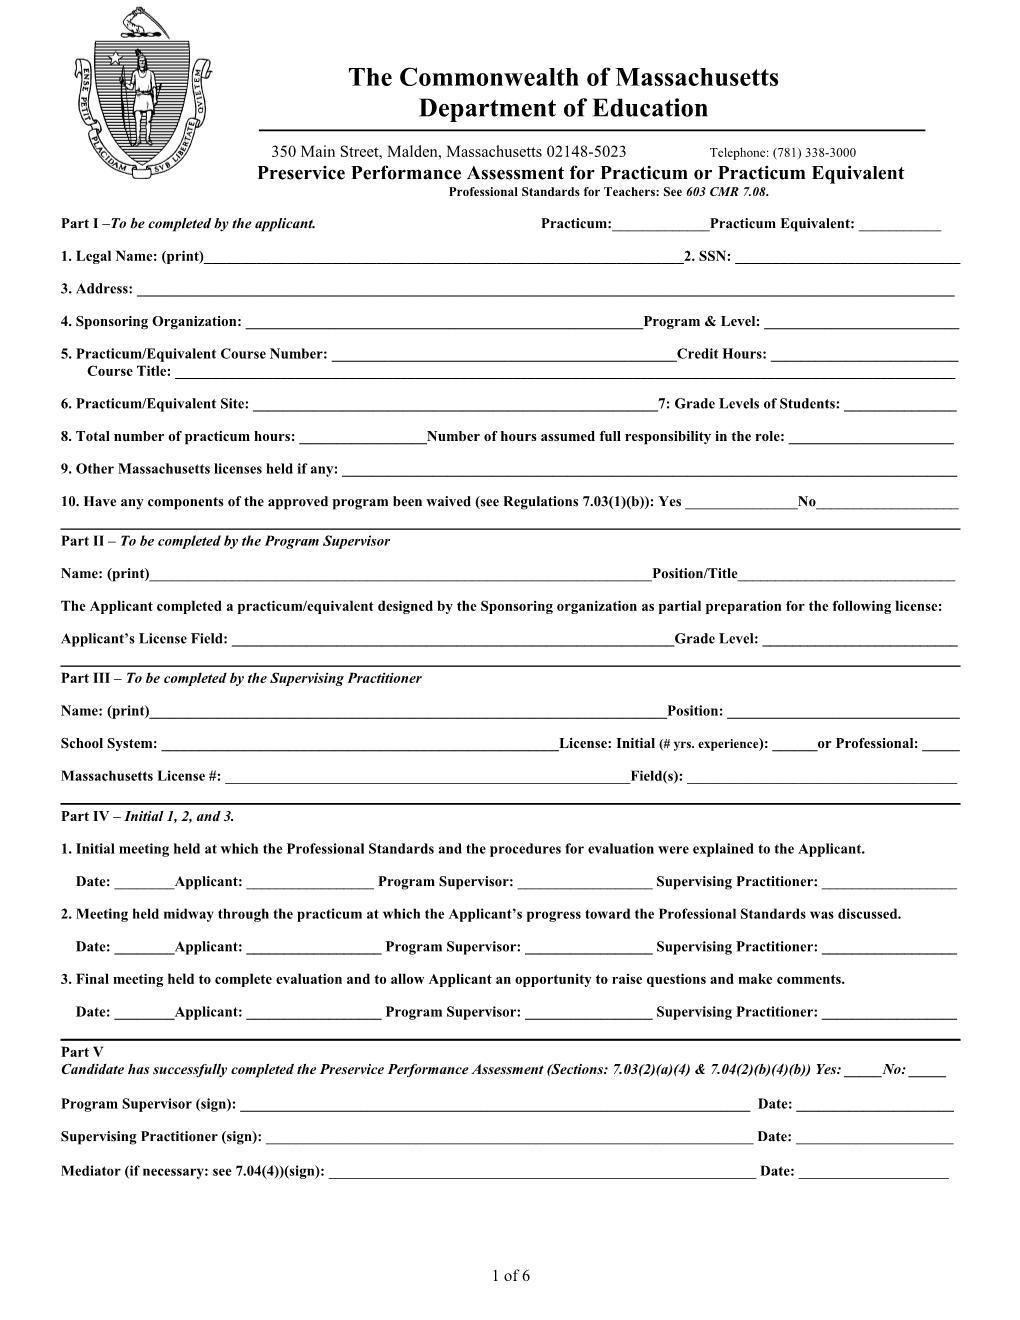 Form for Preservice Performance Assessment